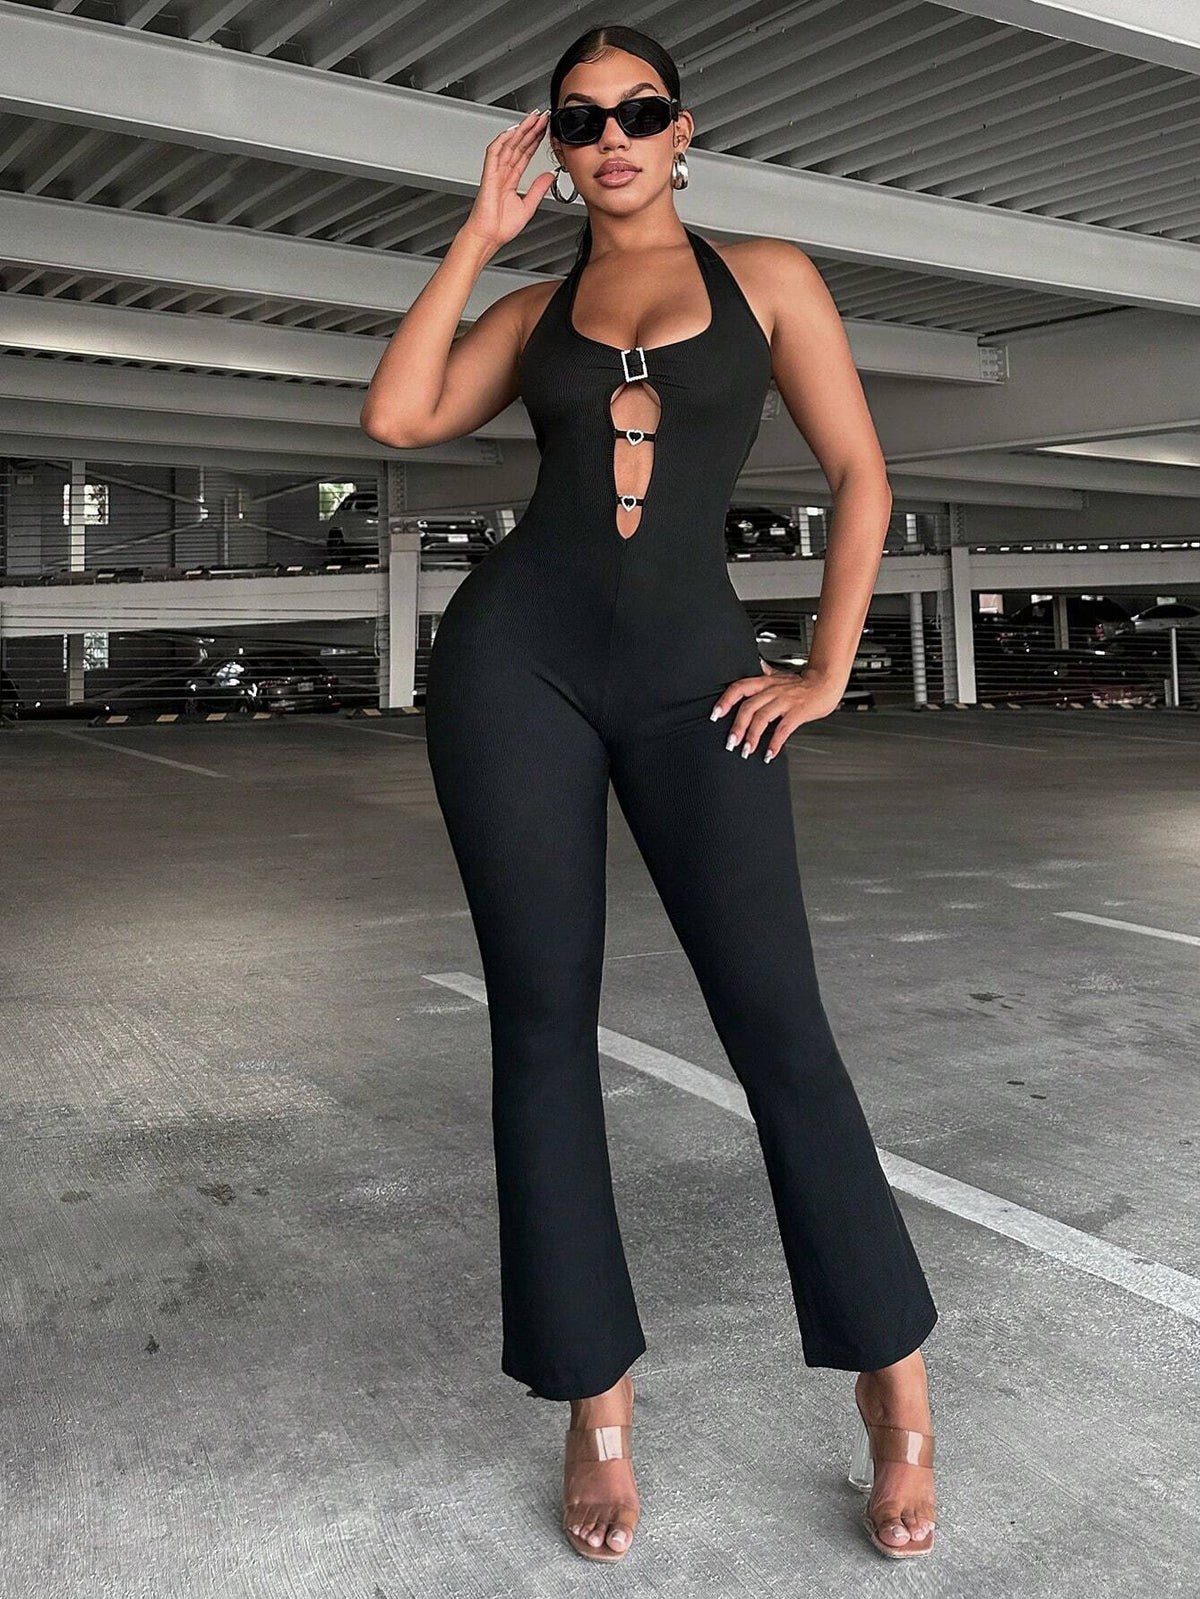 Solid Color Basic Cutout Jumpsuit For Daily Wear